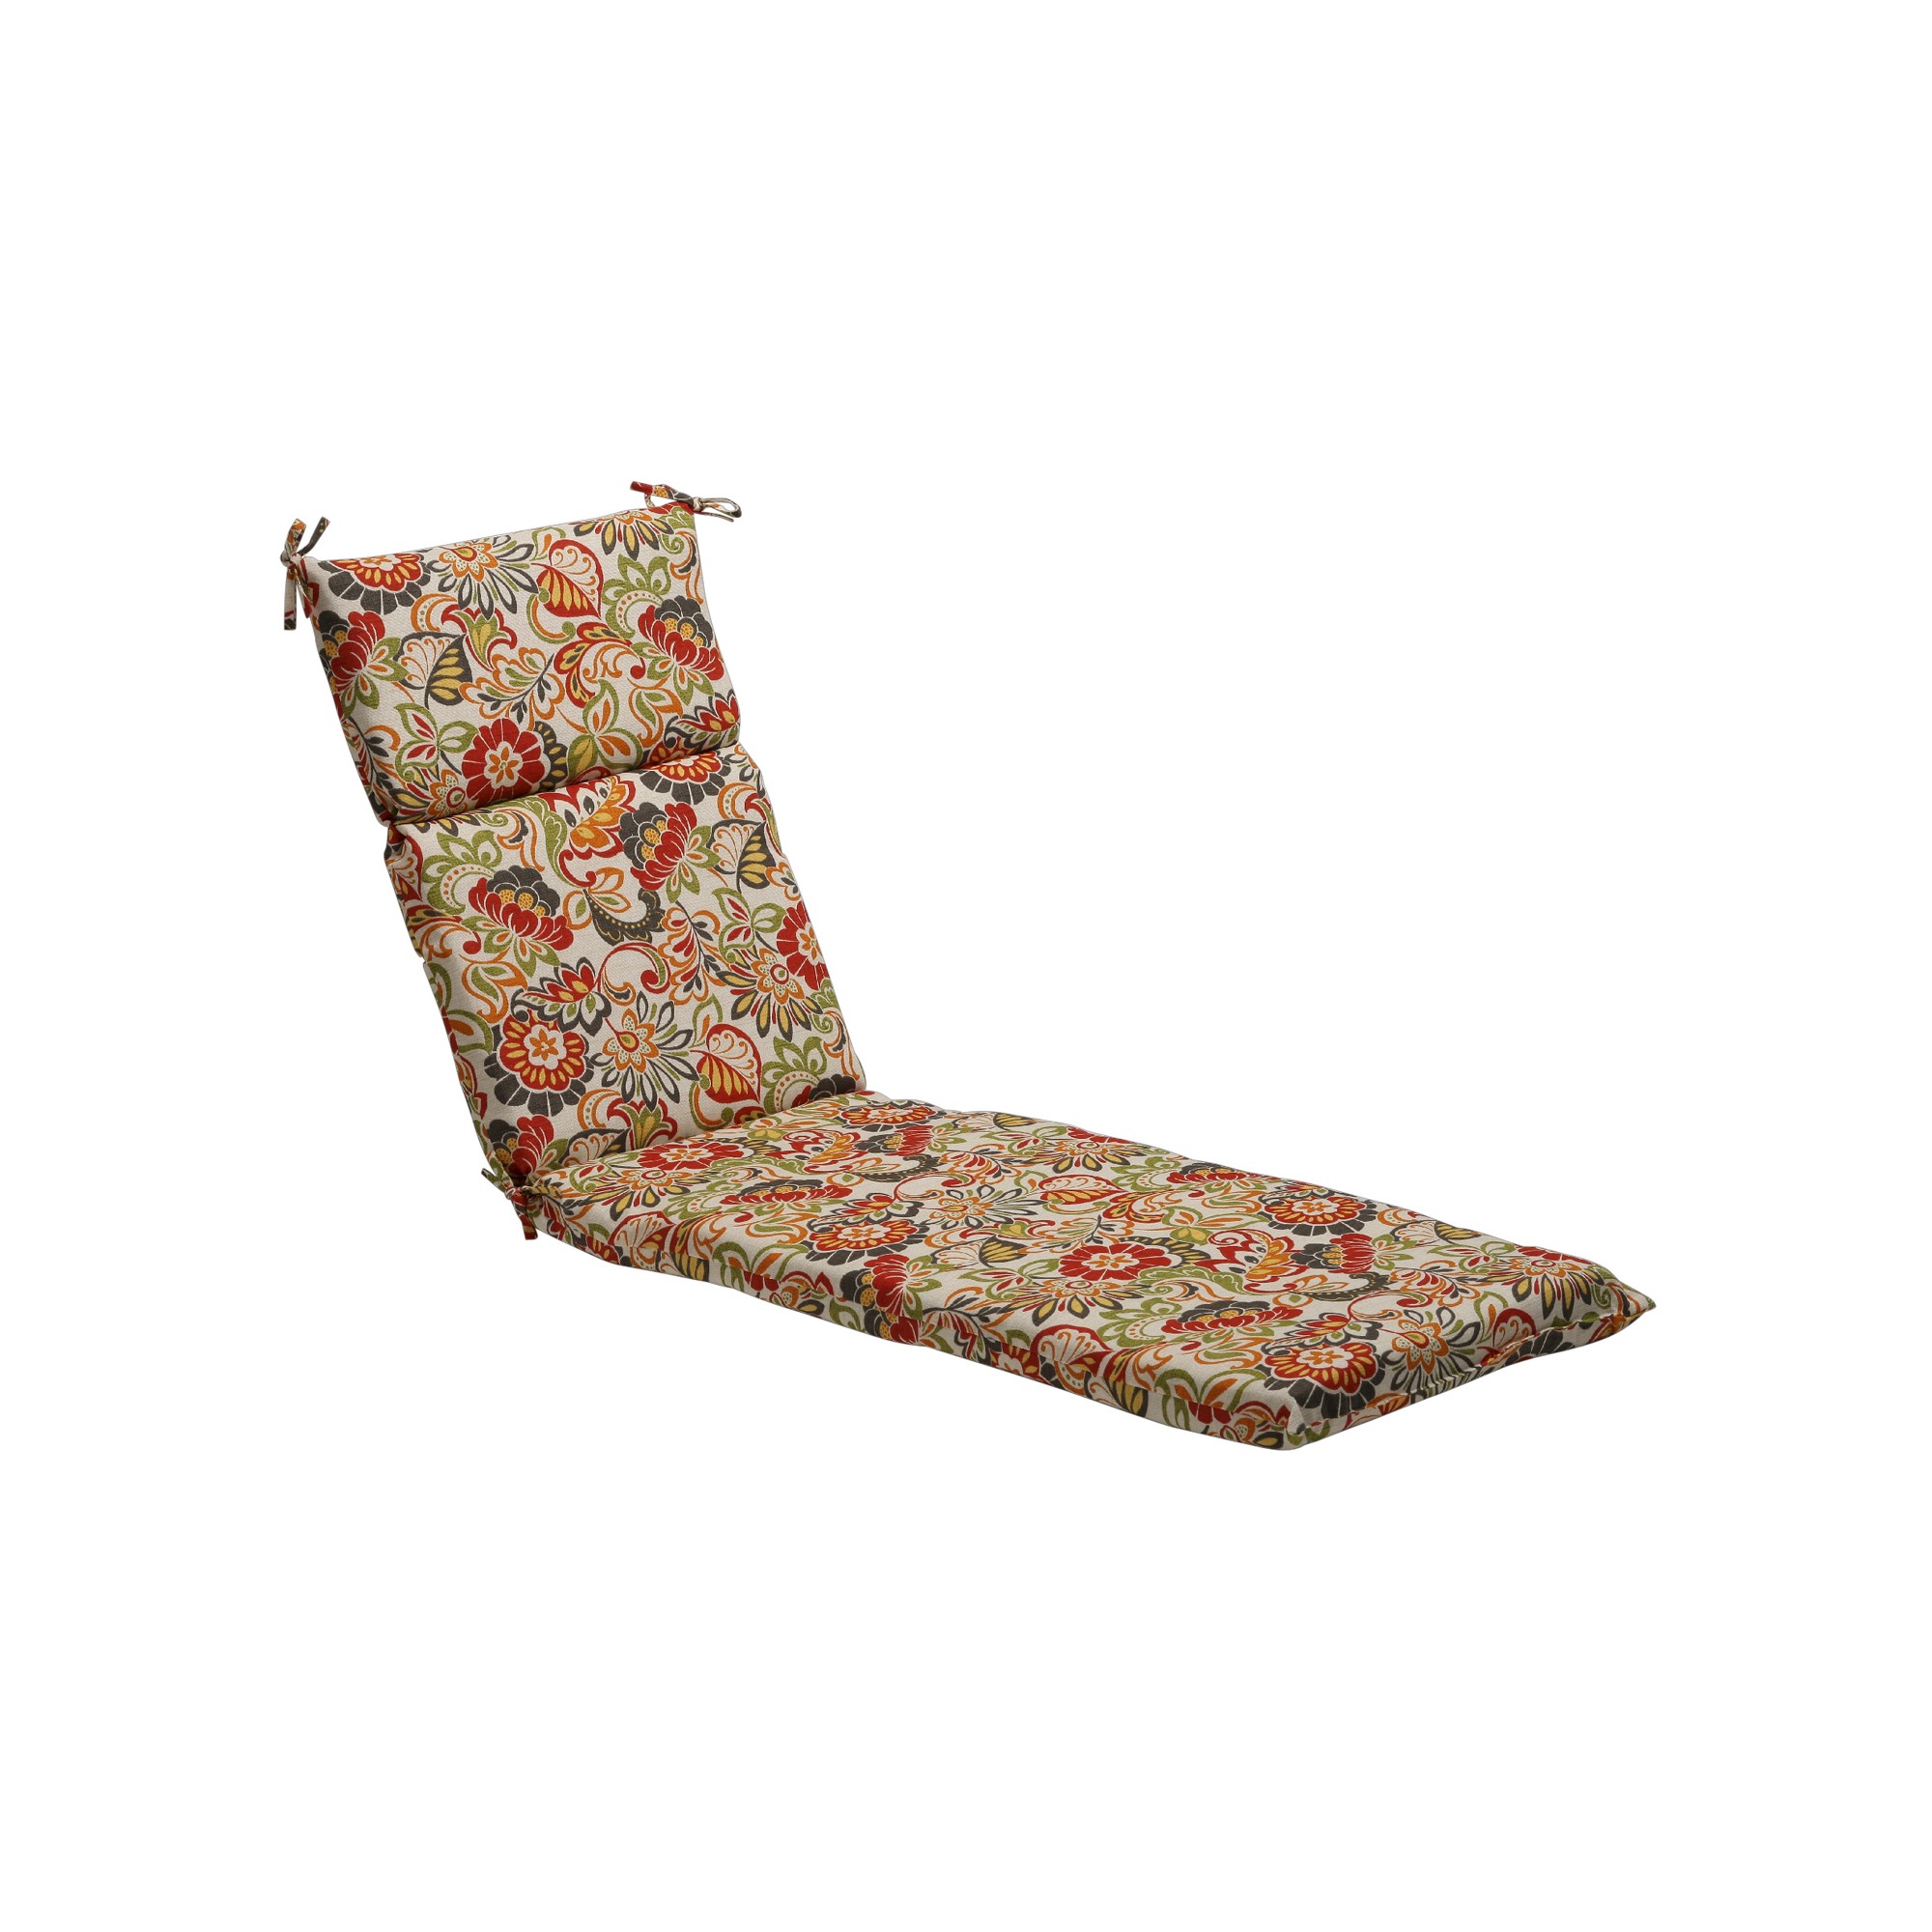 Outdoor Chaise Lounge Cushion - Green/Off-White/Red Floral